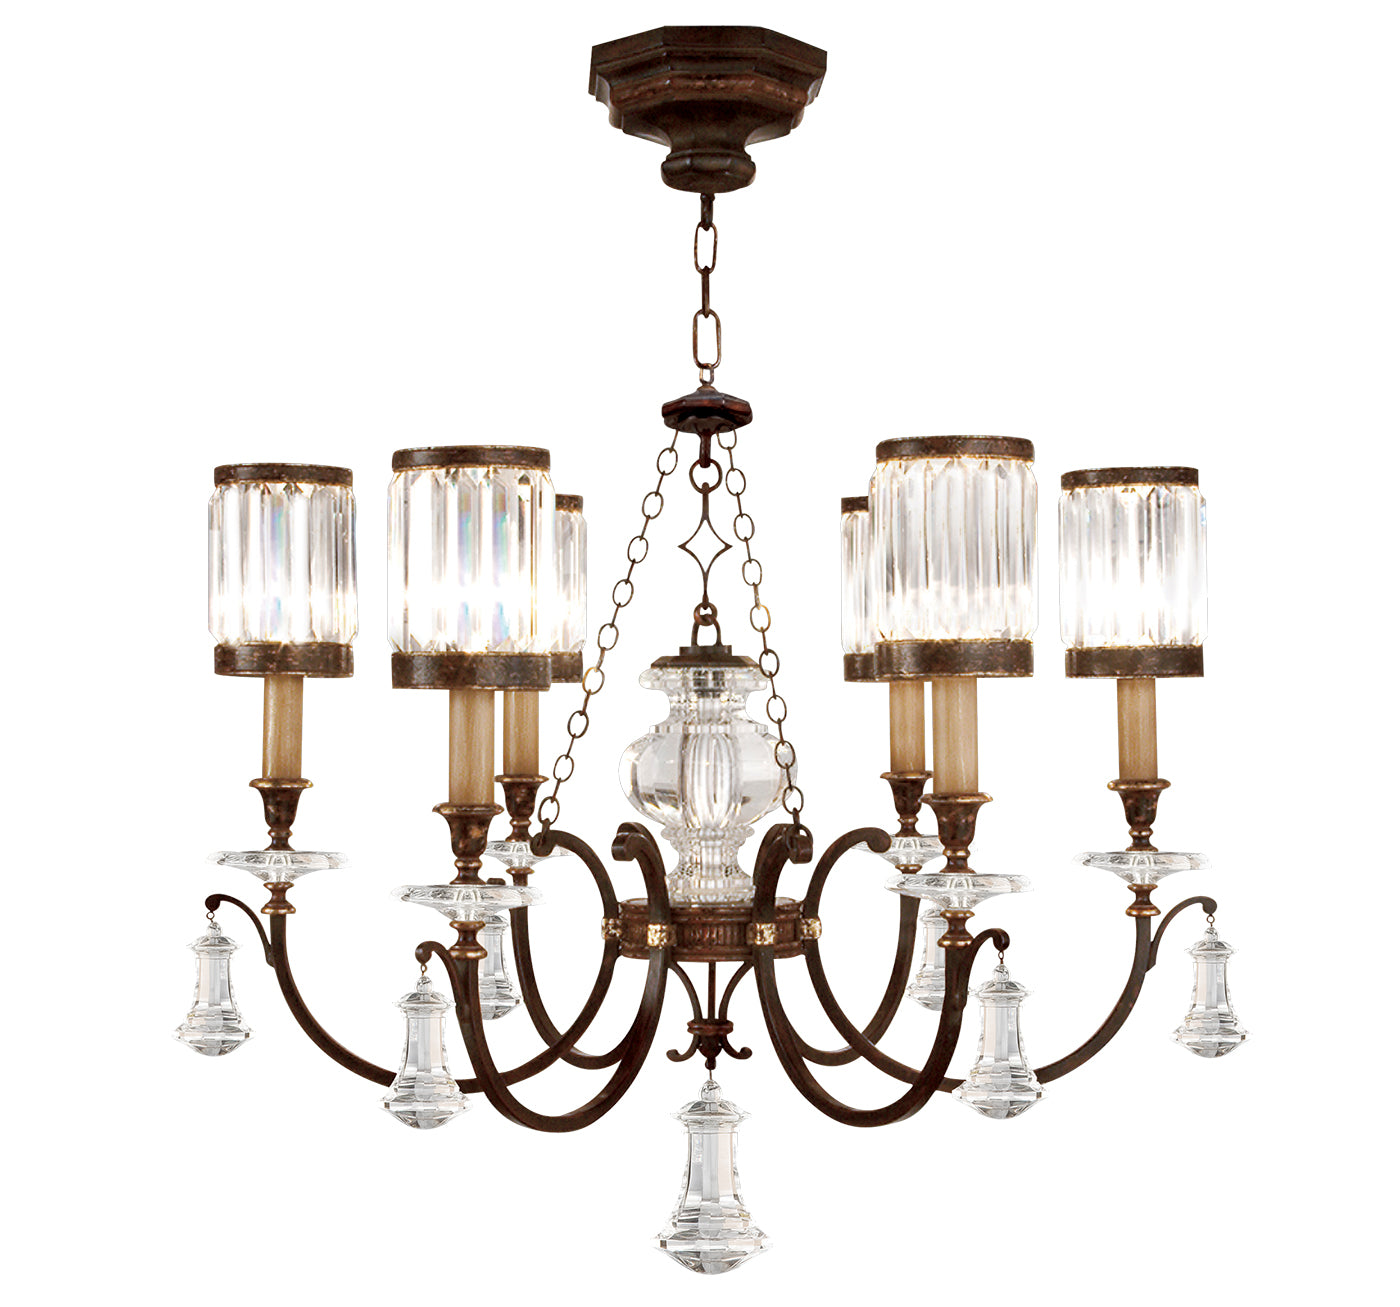 Fine Art Handcrafted Lighting Eaton Place Chandelier Chandeliers Fine Art Handcrafted Lighting Bronze 32 x 28 